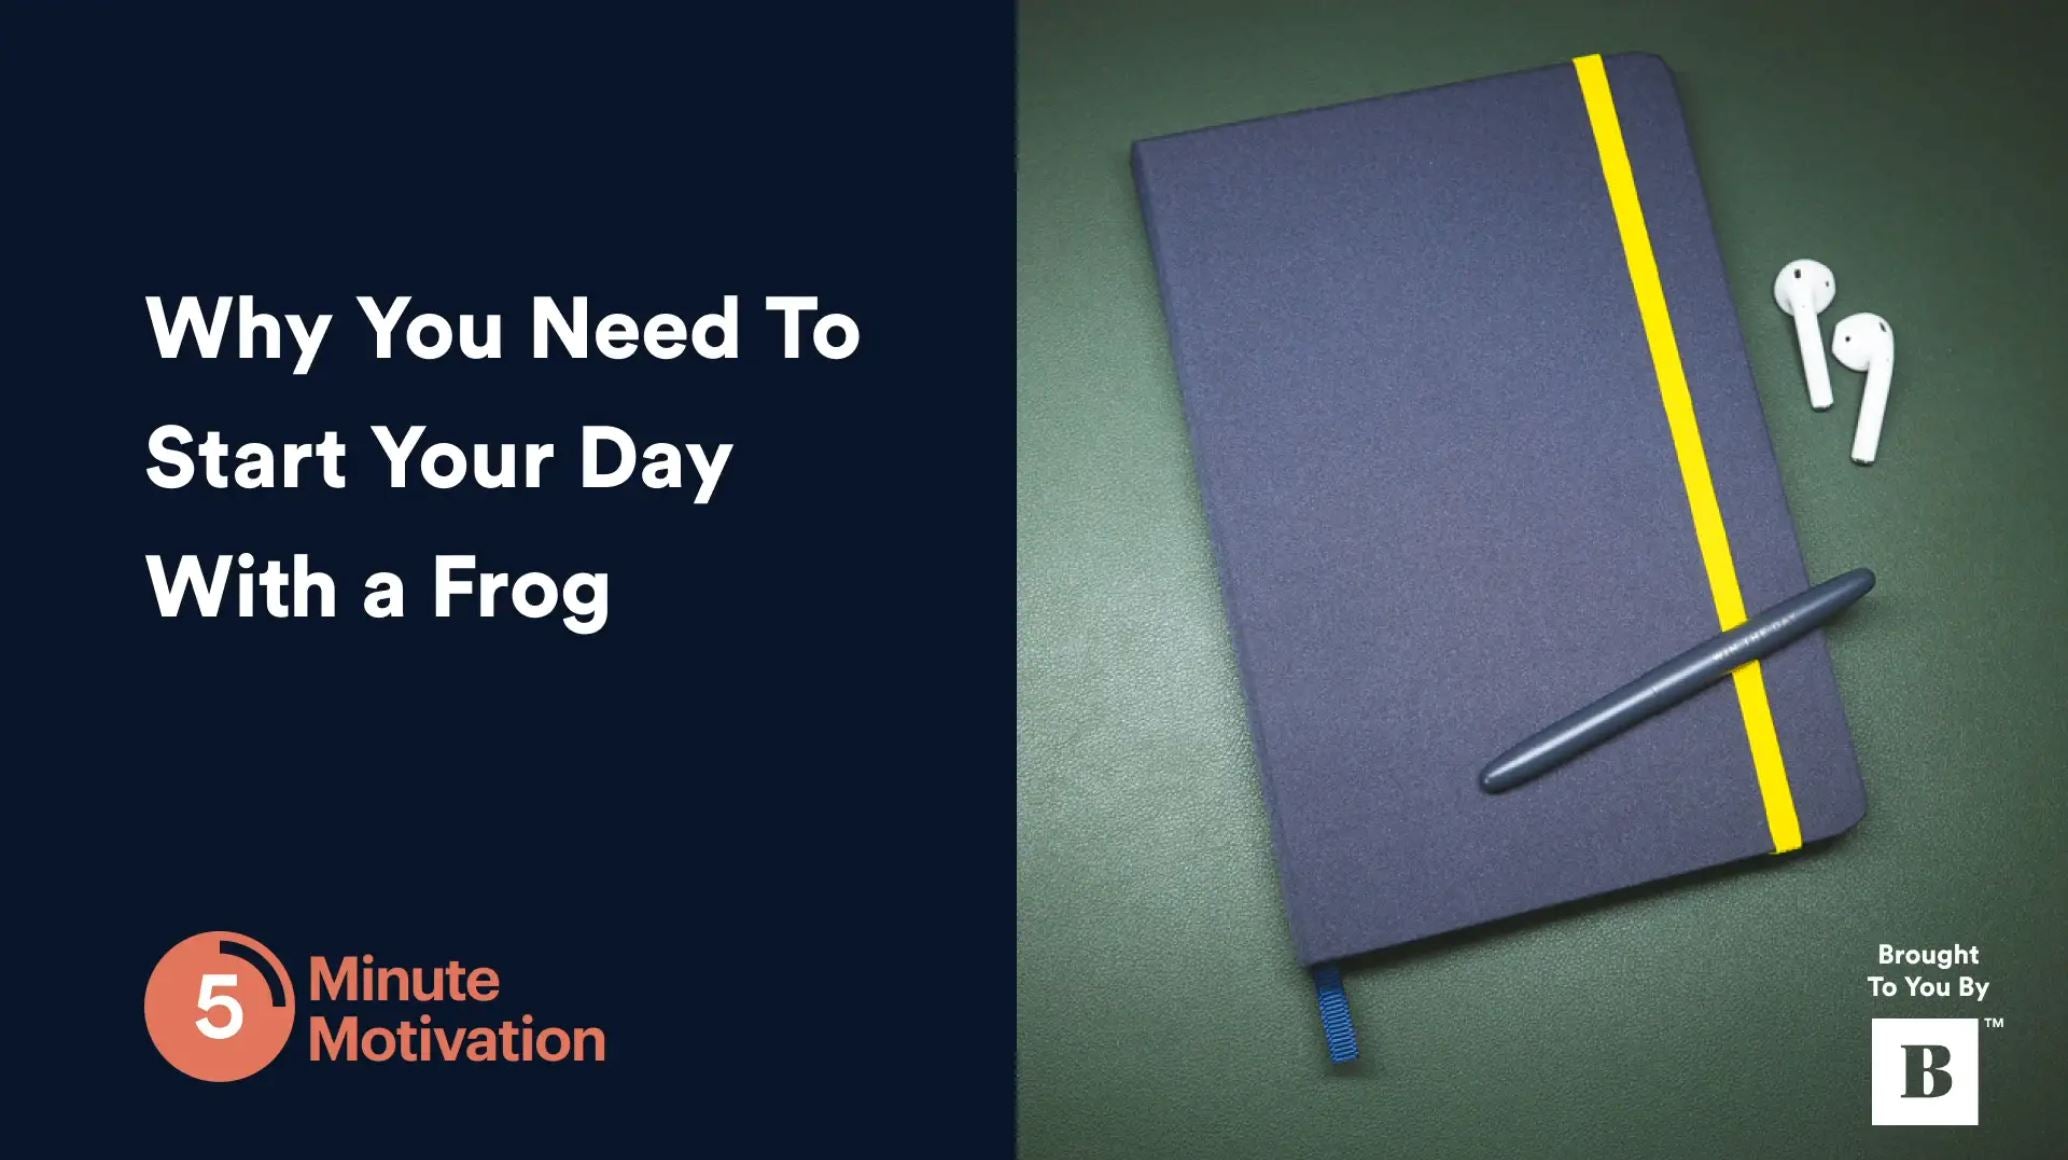 Why You Need To Start Your Day With a Frog